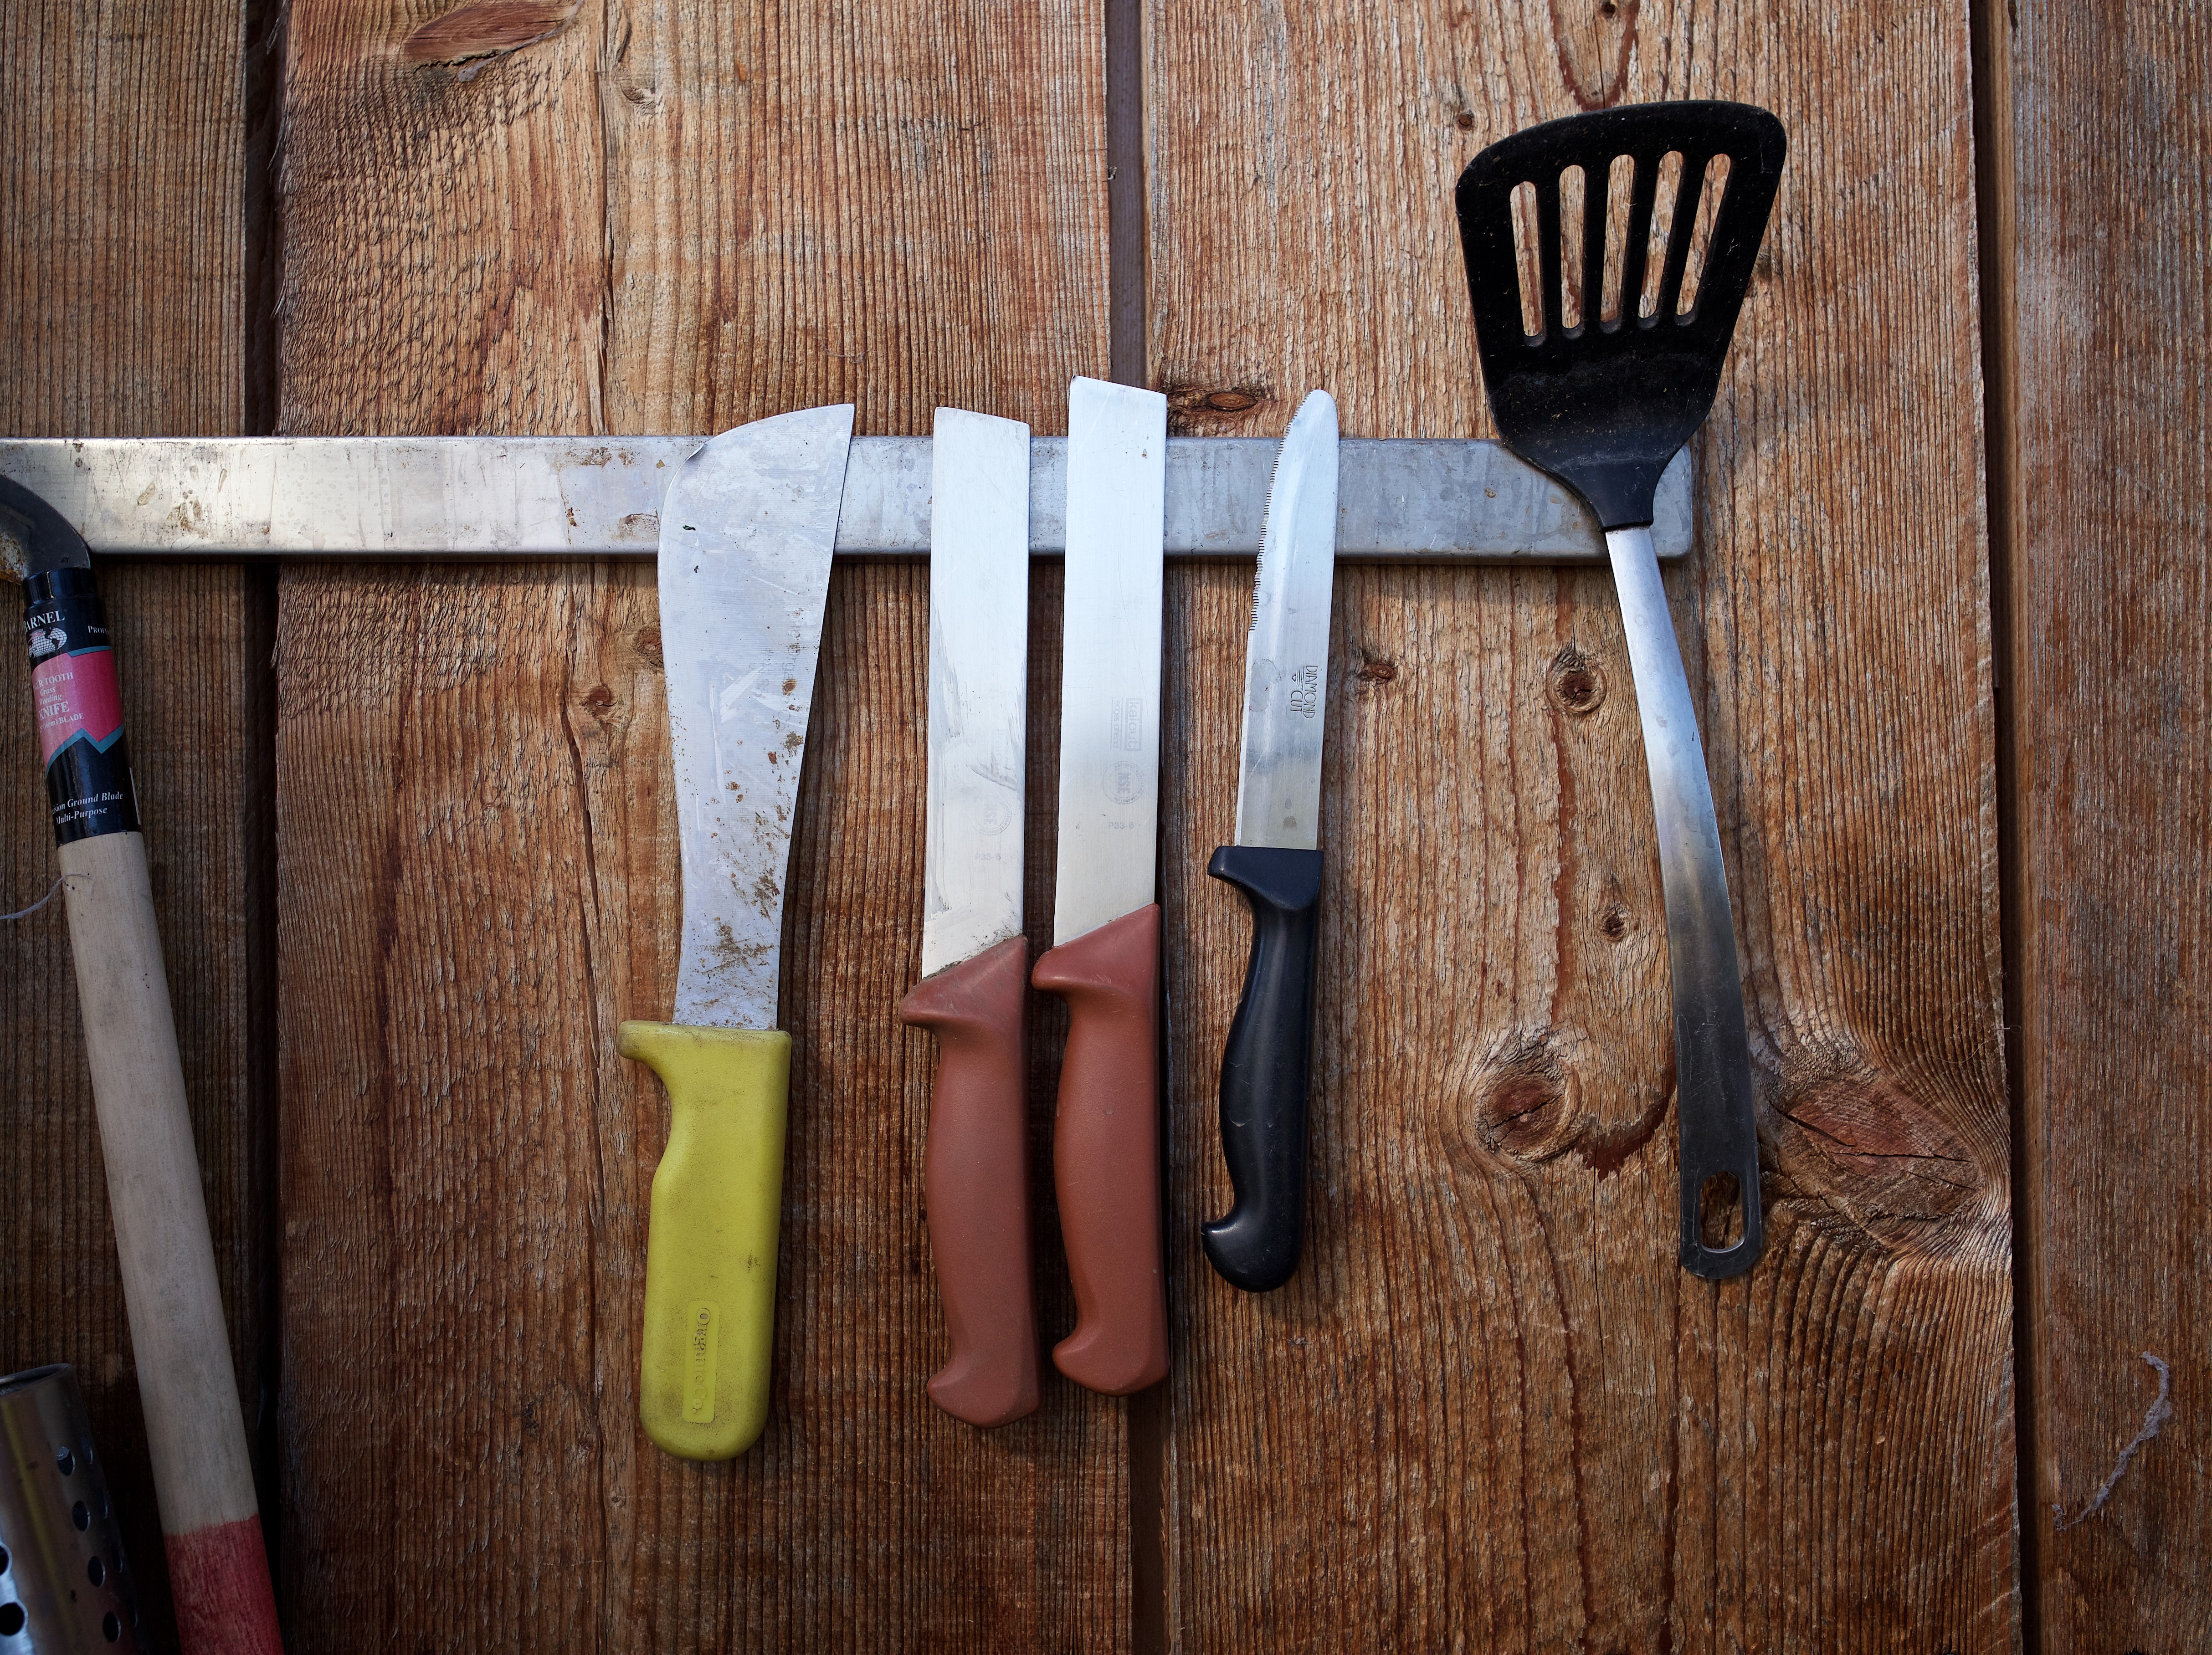 Harvest knives and other tools hanging from magnetic rack against a wood wall